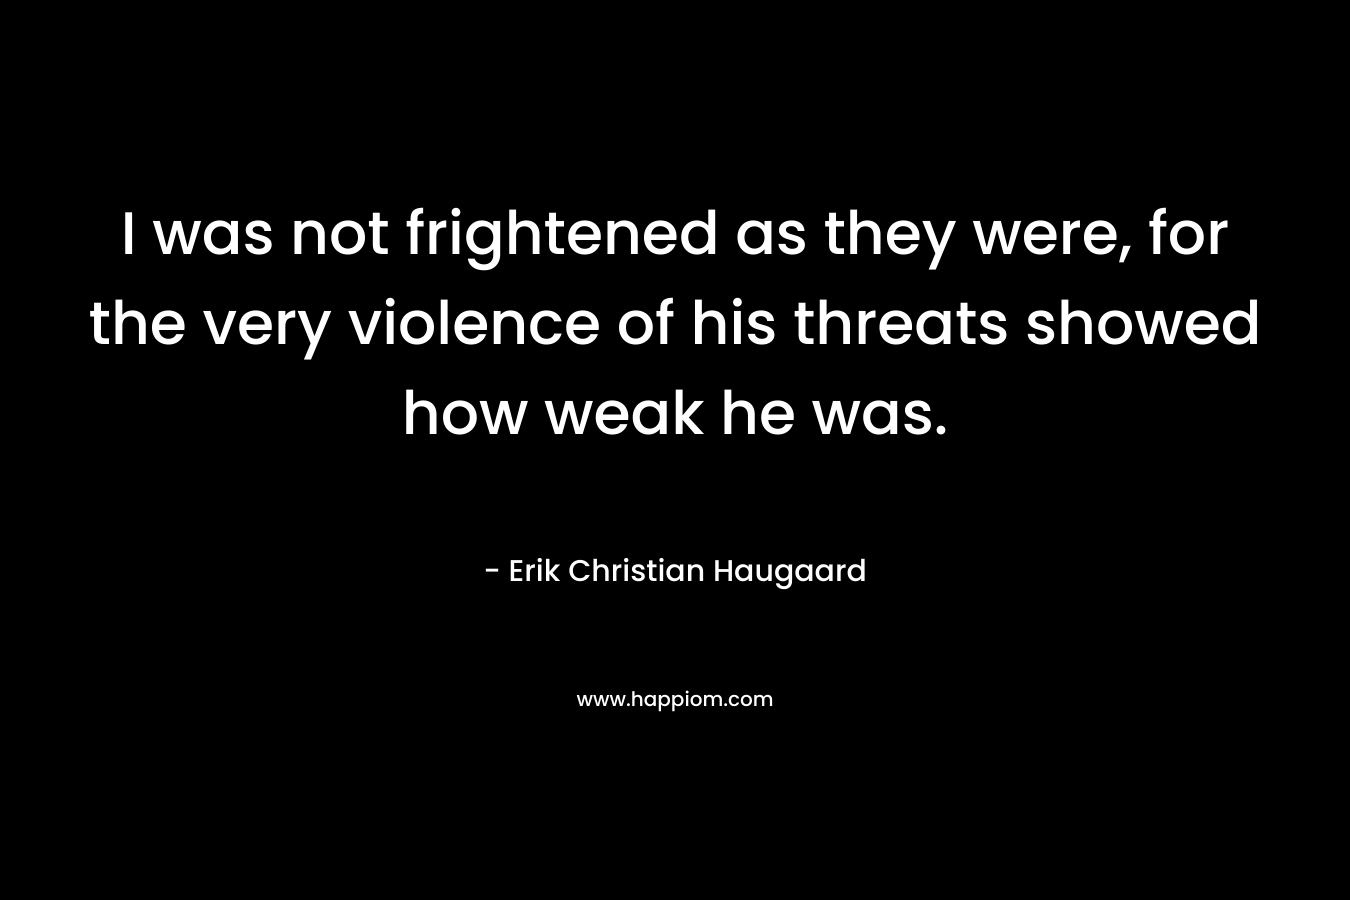 I was not frightened as they were, for the very violence of his threats showed how weak he was. – Erik Christian Haugaard